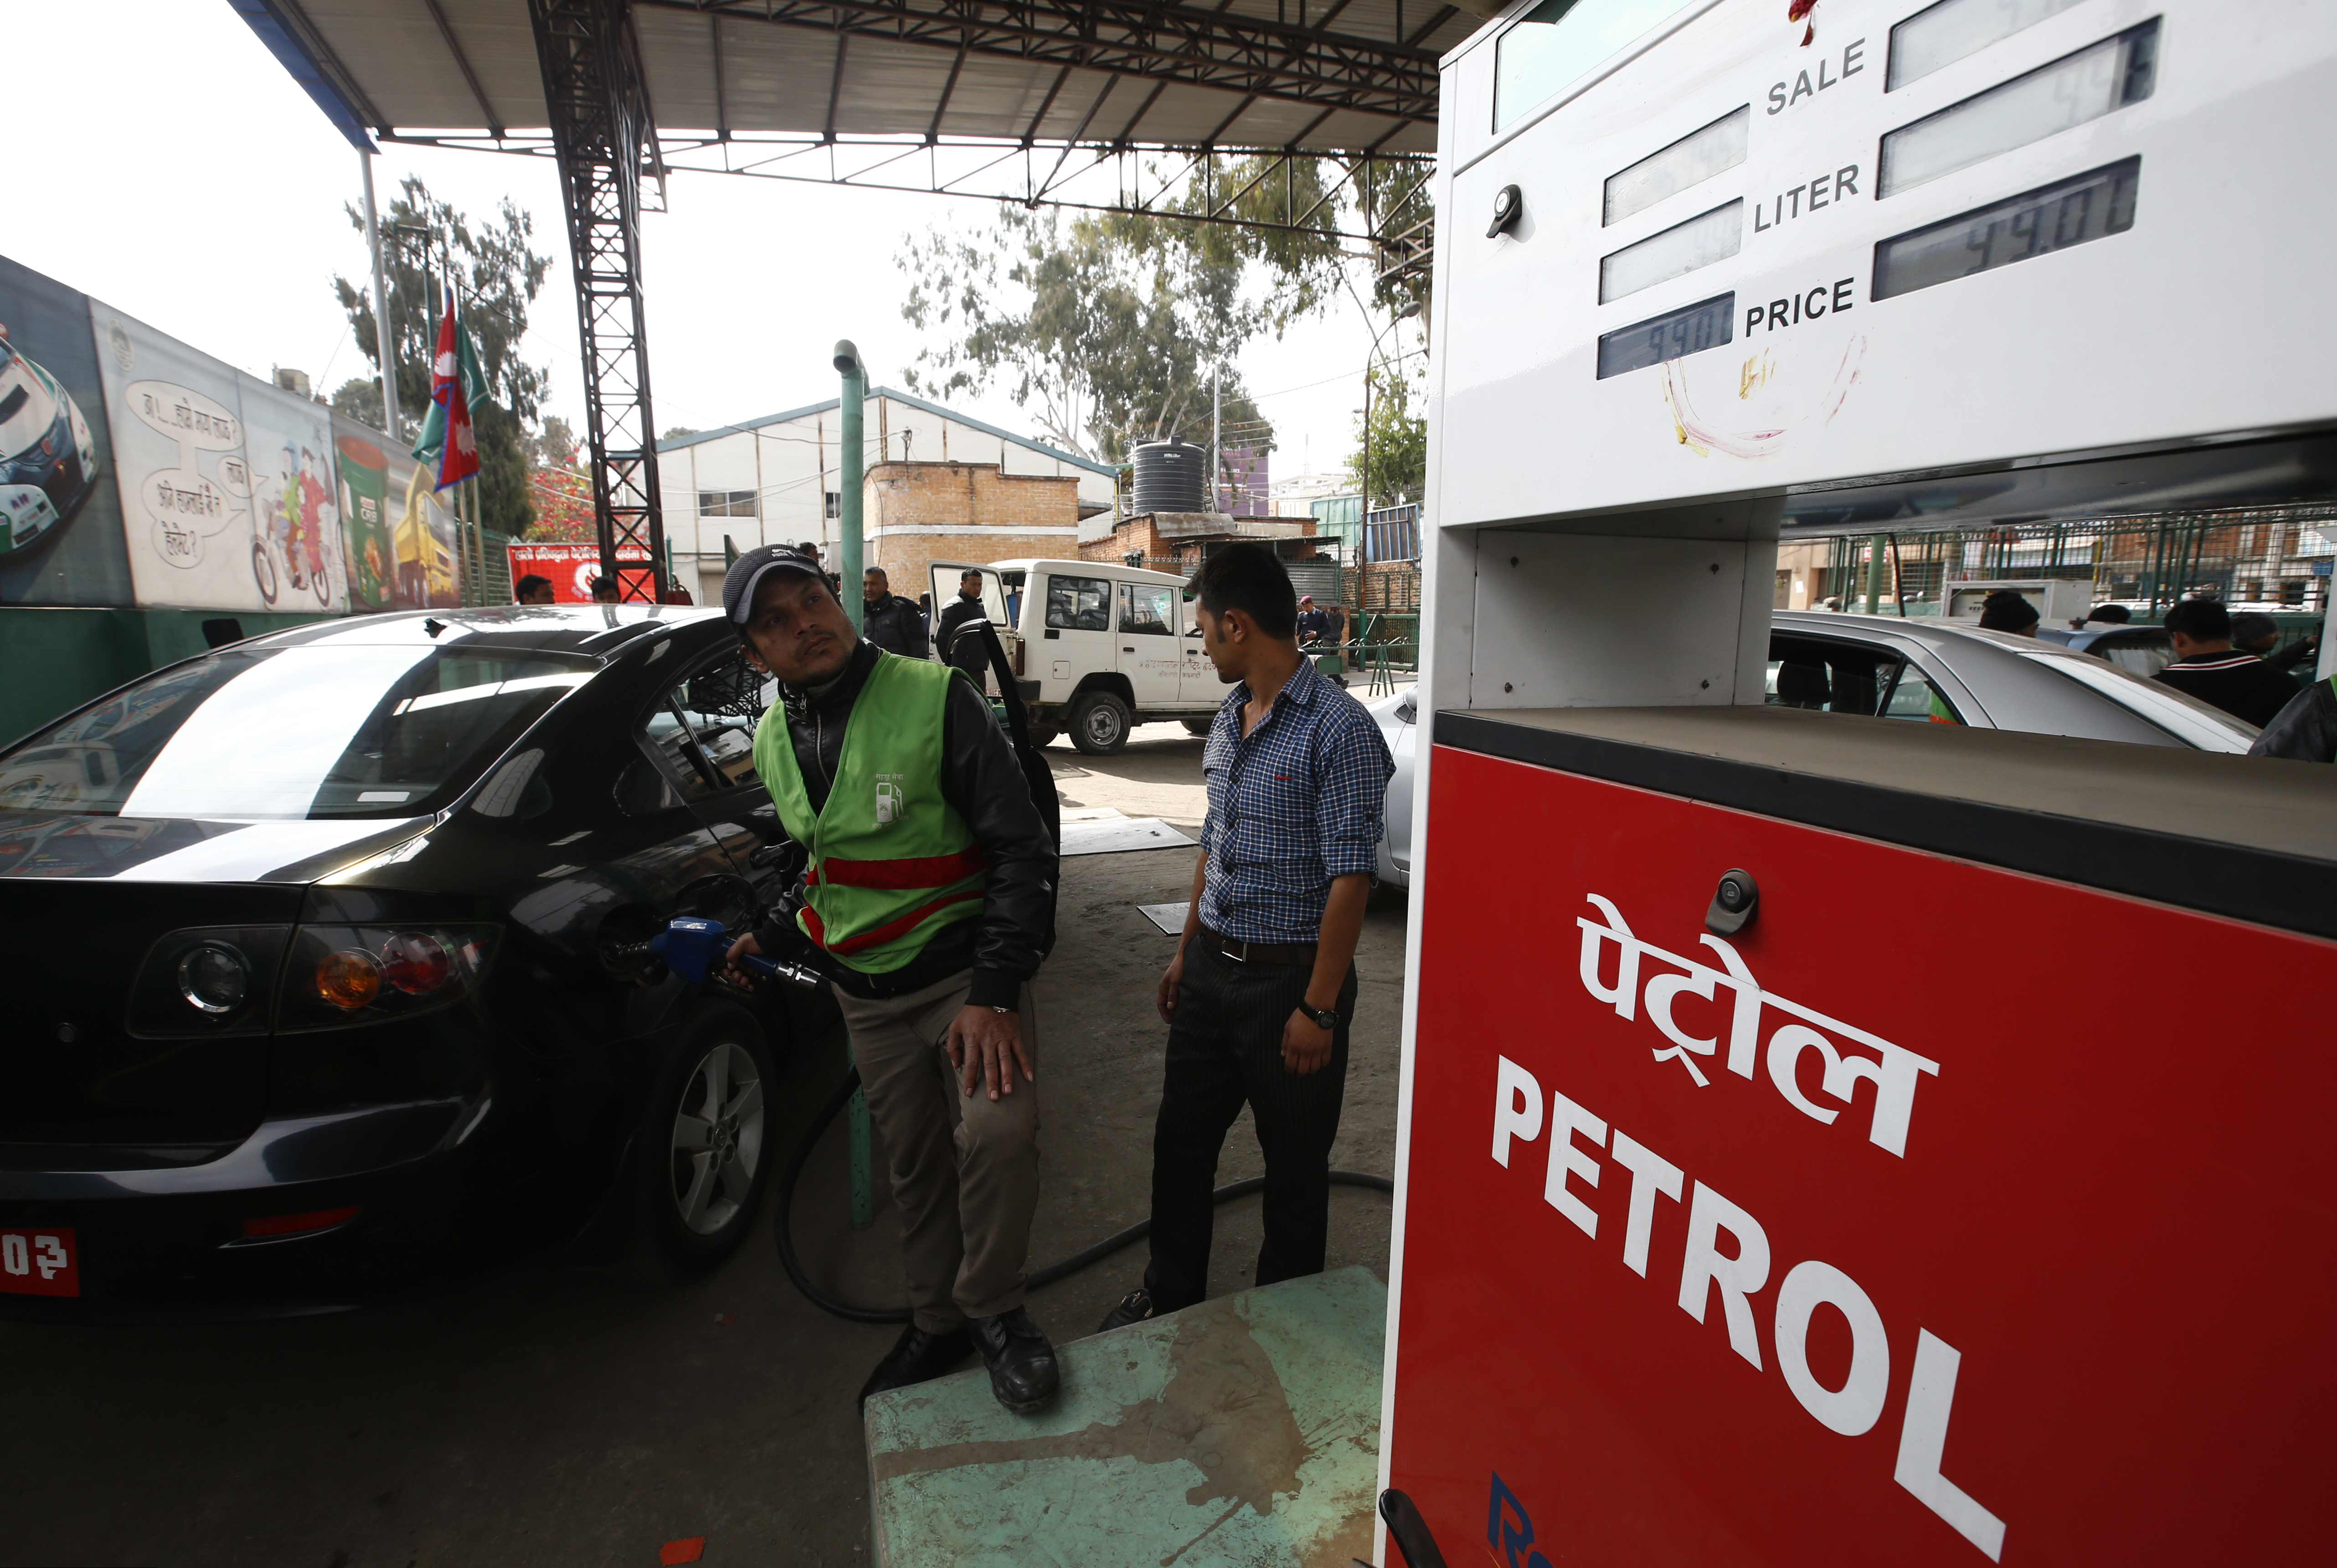 A petrol pump attendant (L) fills petrol for 99 NRS equivalent to 0.91 USD per litre on a car at Saja Petrol pump after the price for petrol decreased from 104 NRS equivalent to 0.96 USD per litre